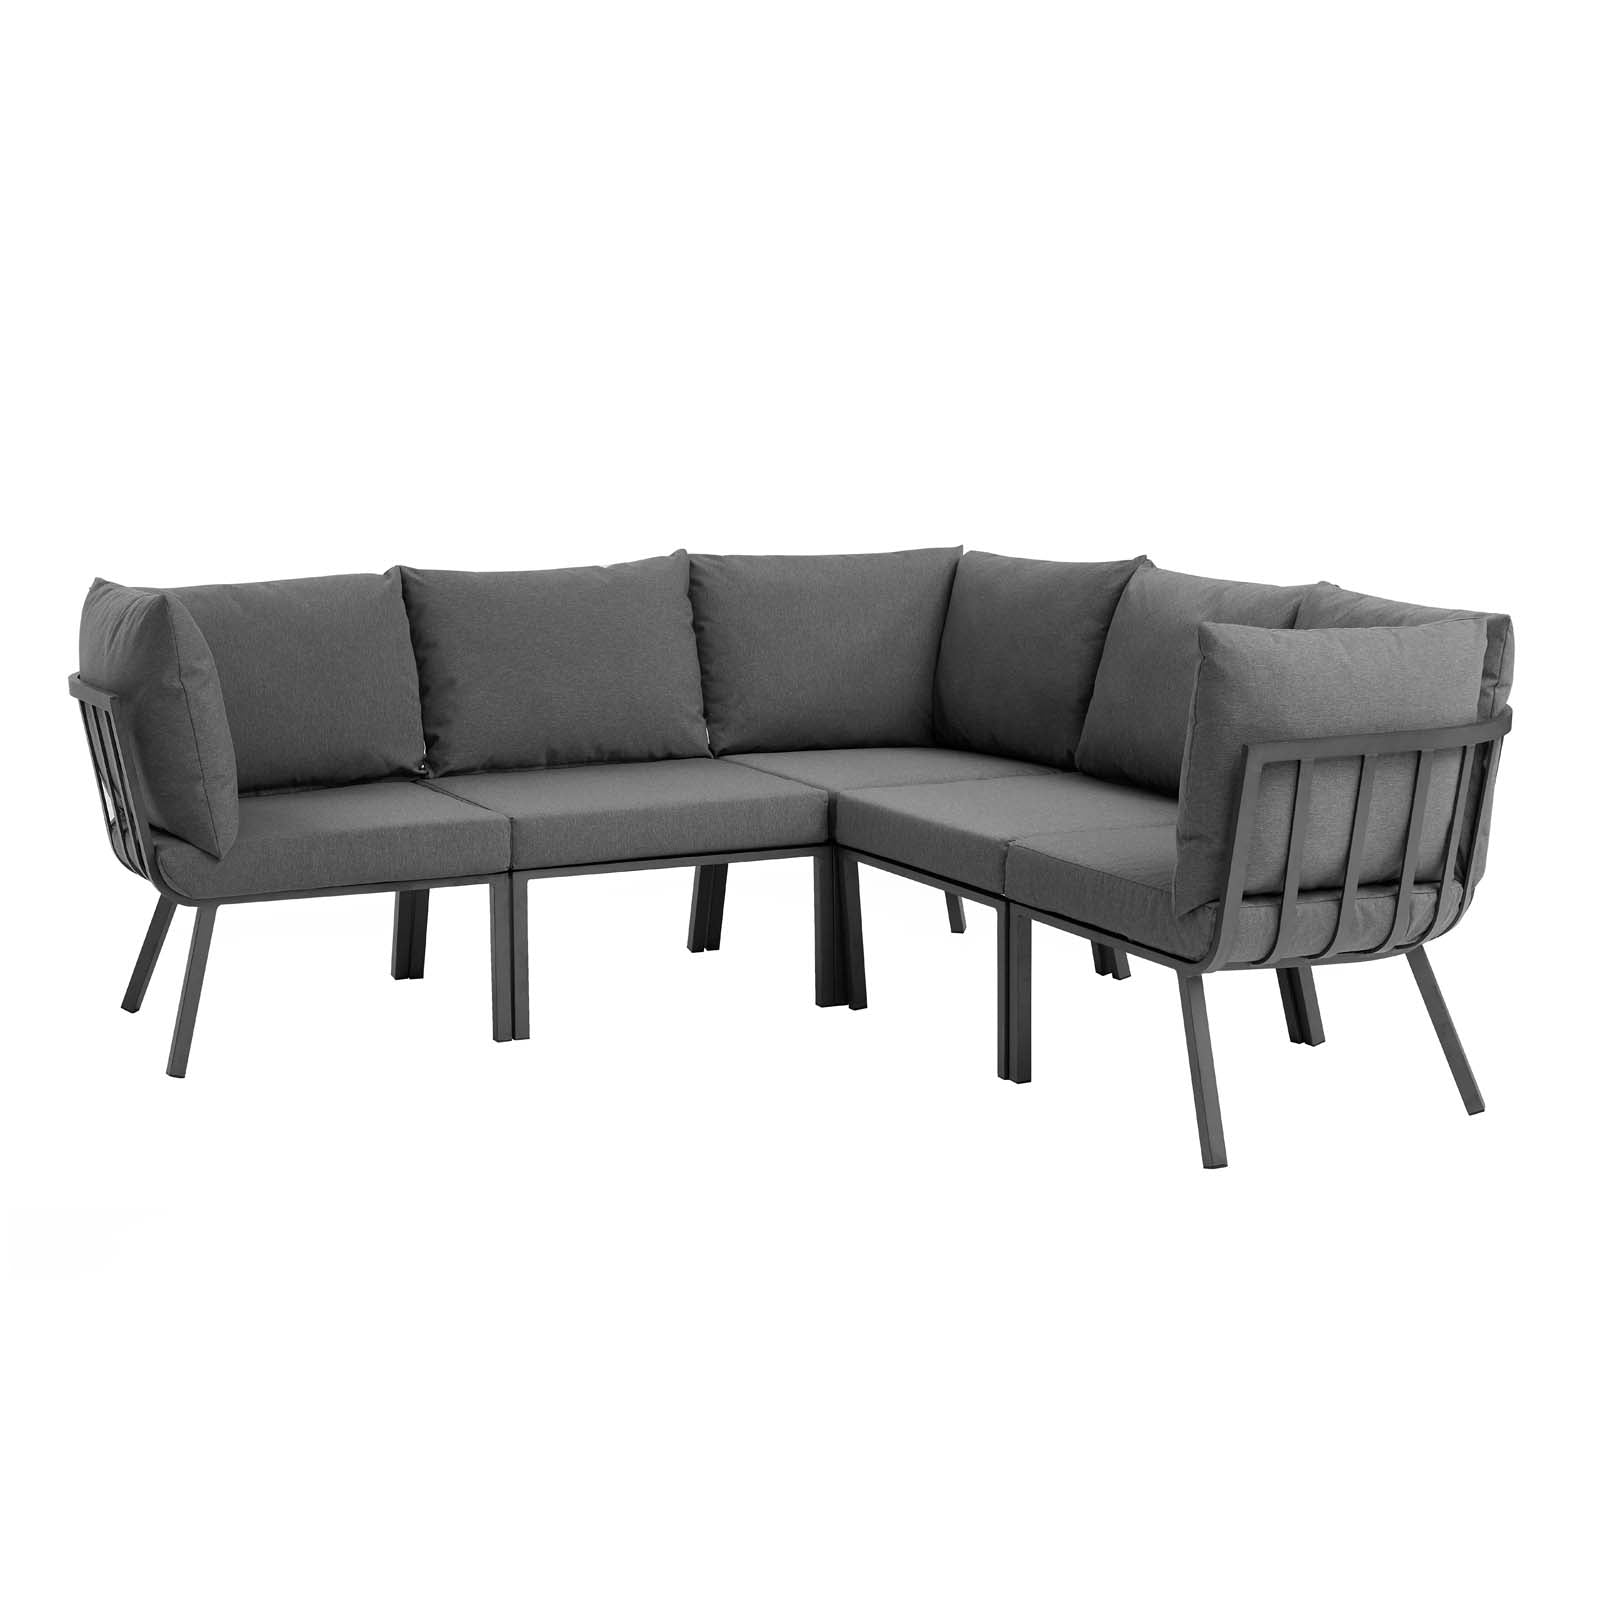 Riverside 5 Piece Outdoor Patio Aluminum Sectional-Outdoor Sectional-Modway-Wall2Wall Furnishings